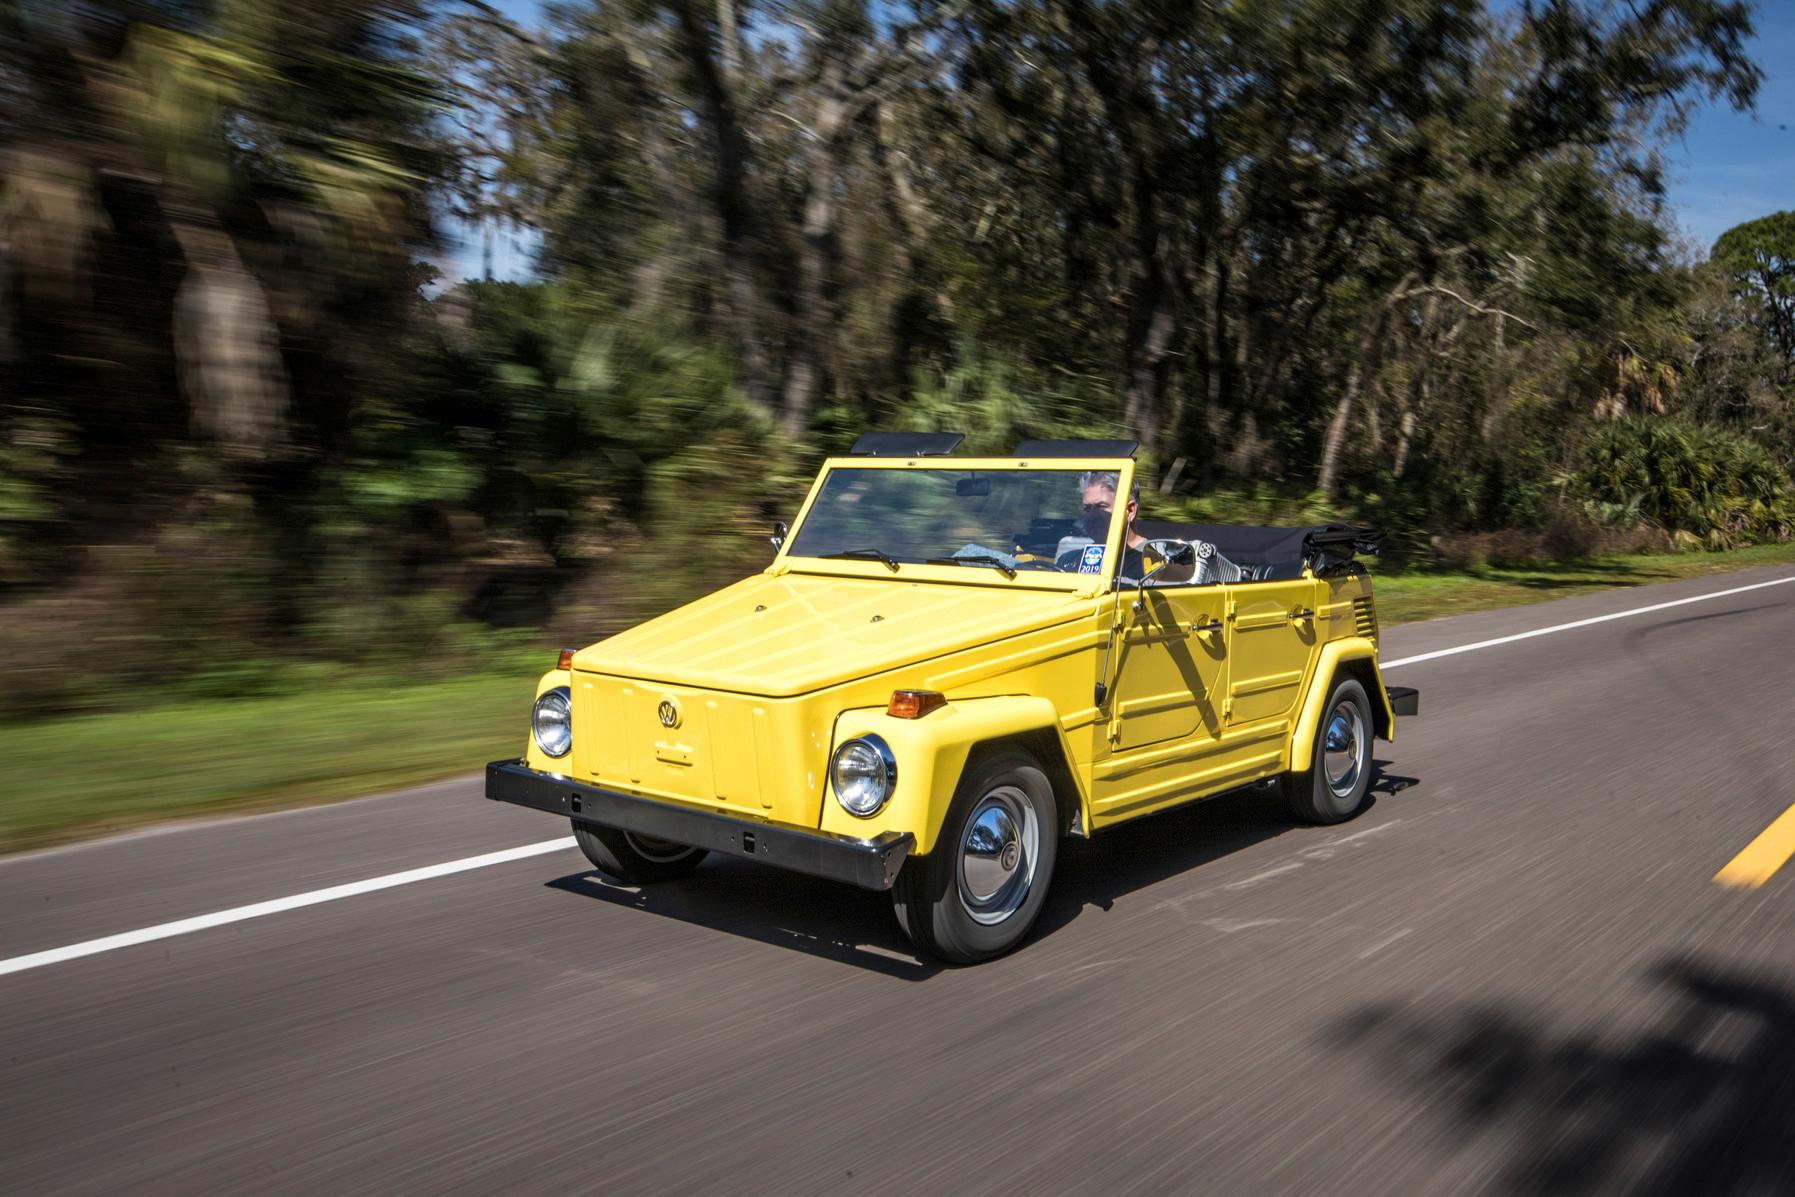 A yellow Volkswagen Thing driving down a street